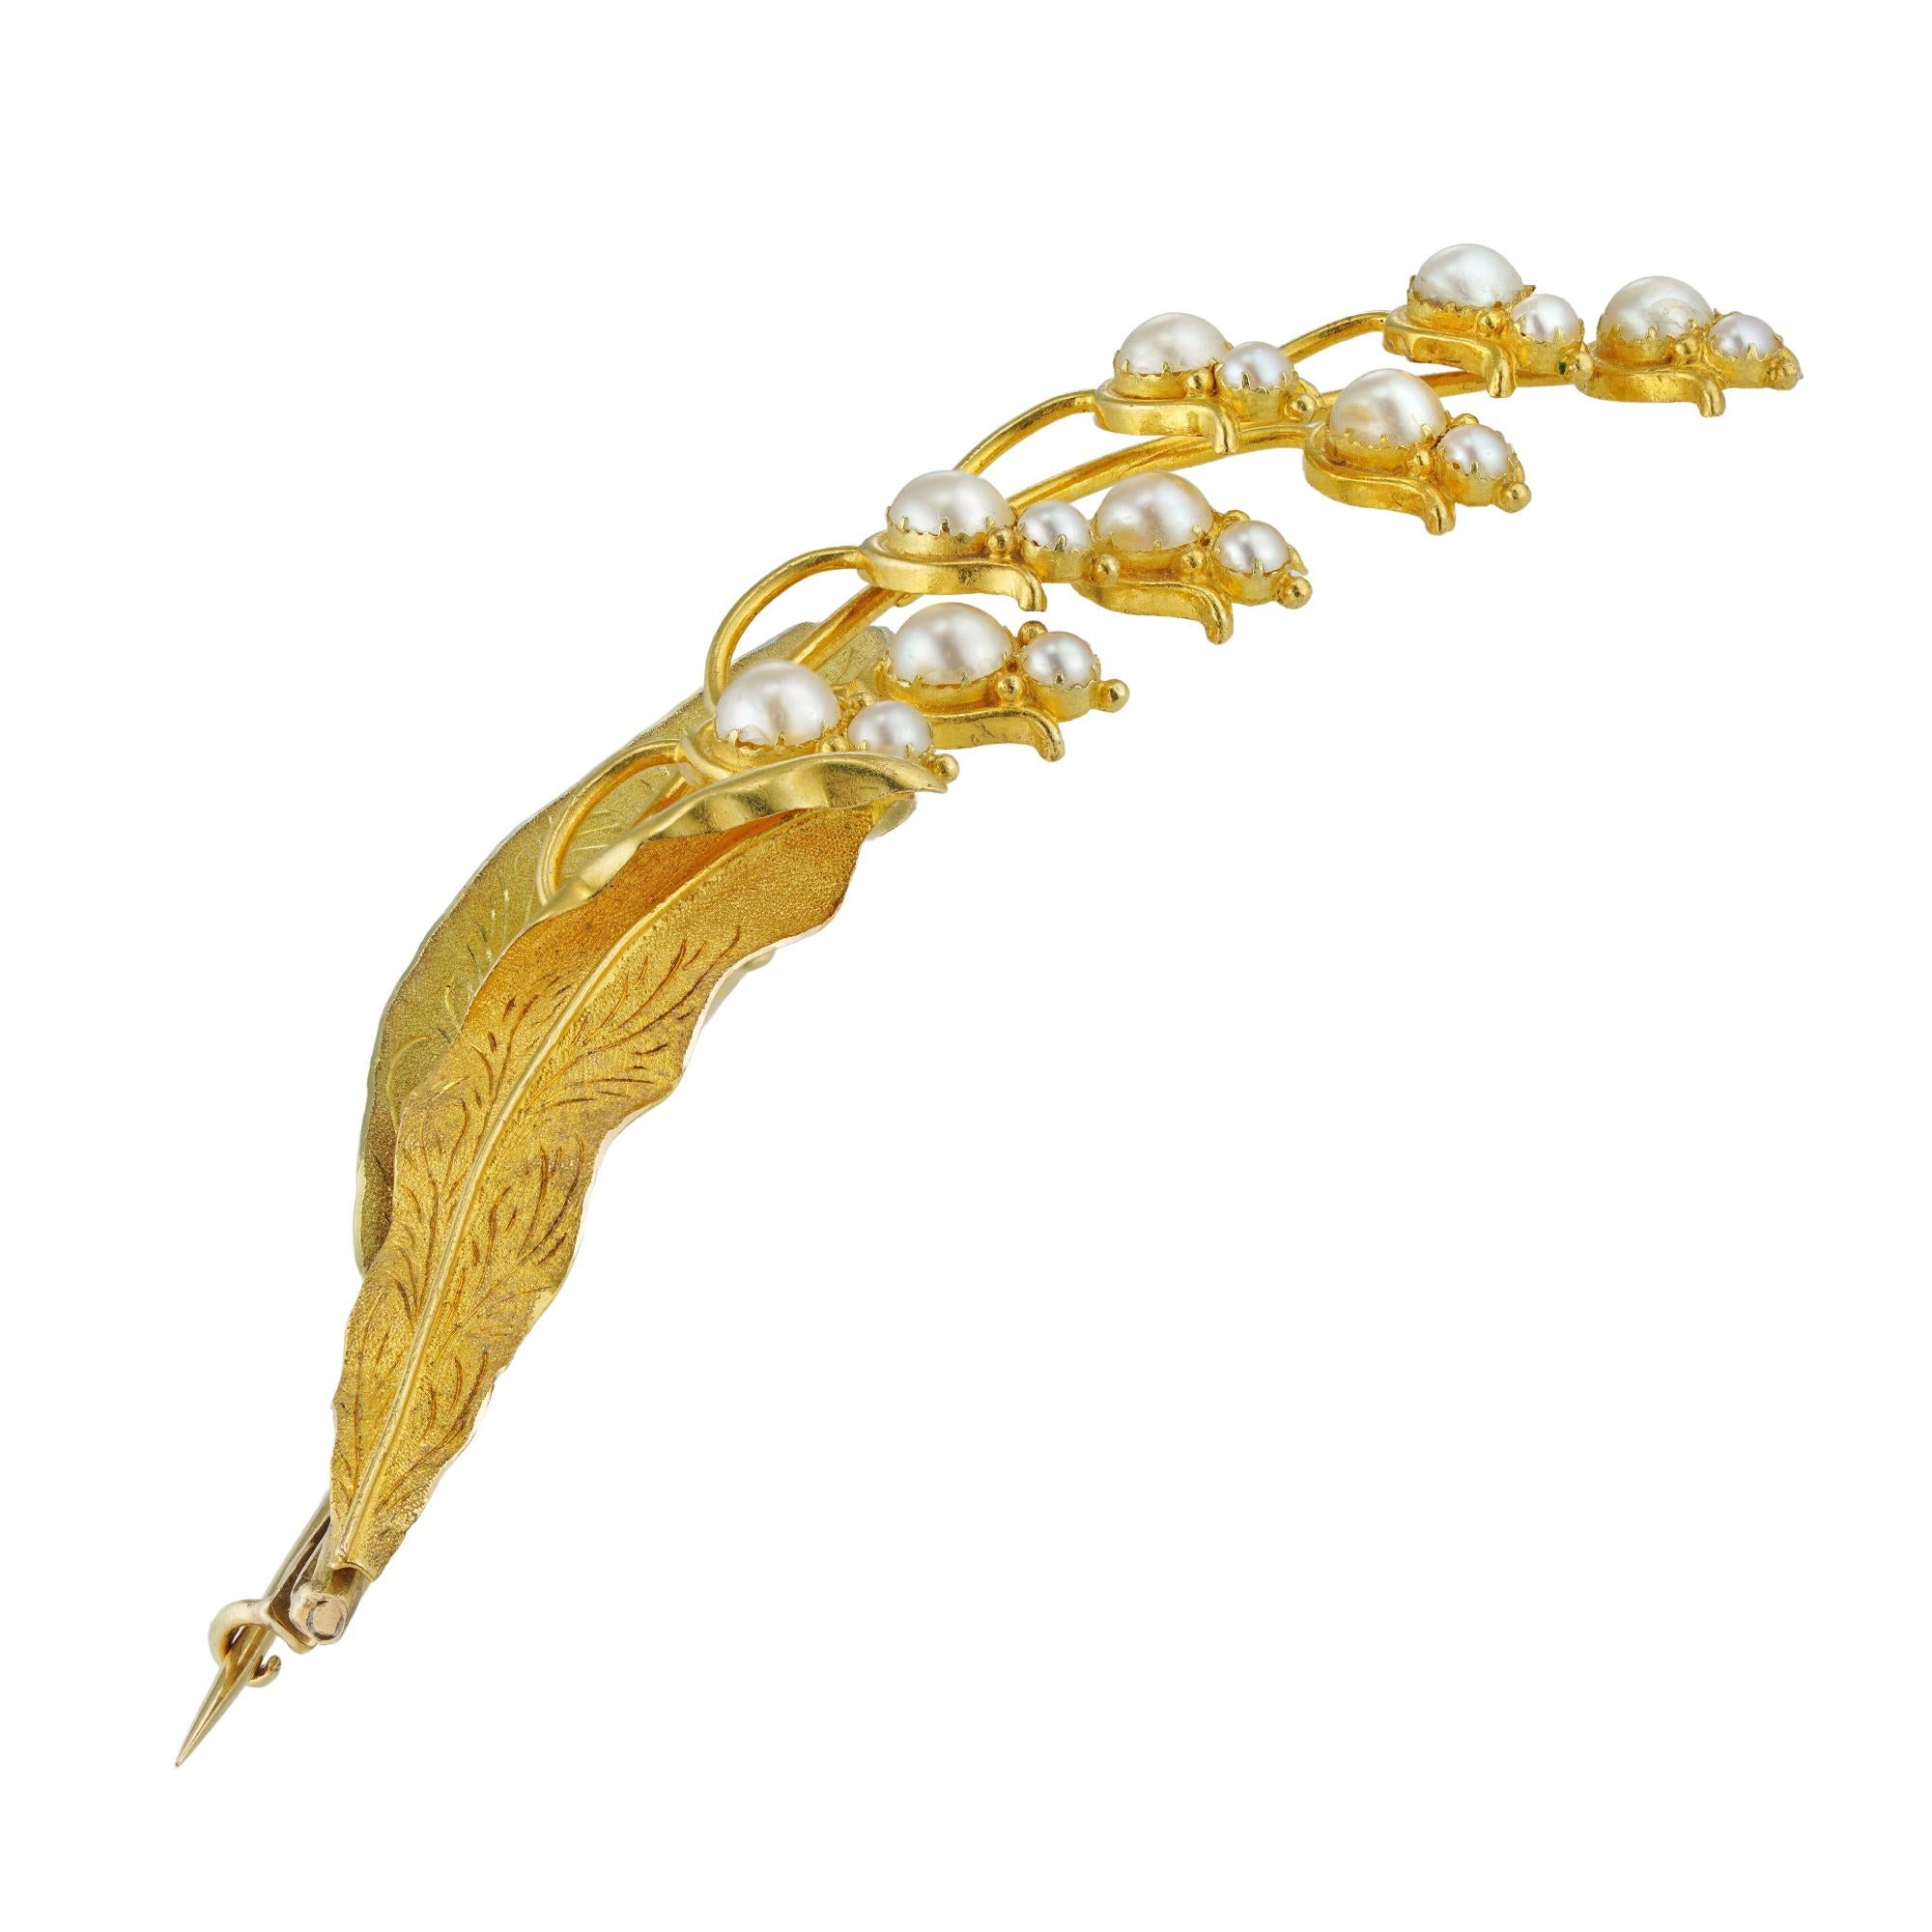 A gold and half-pearl spray brooch, in the form of a lily of the valley spray, the leaves with chased two colour gold mounts, the eight flowers each set with two split pearls, circa 1830, with later brooch fitting, measuring approximately 8 x 2.5